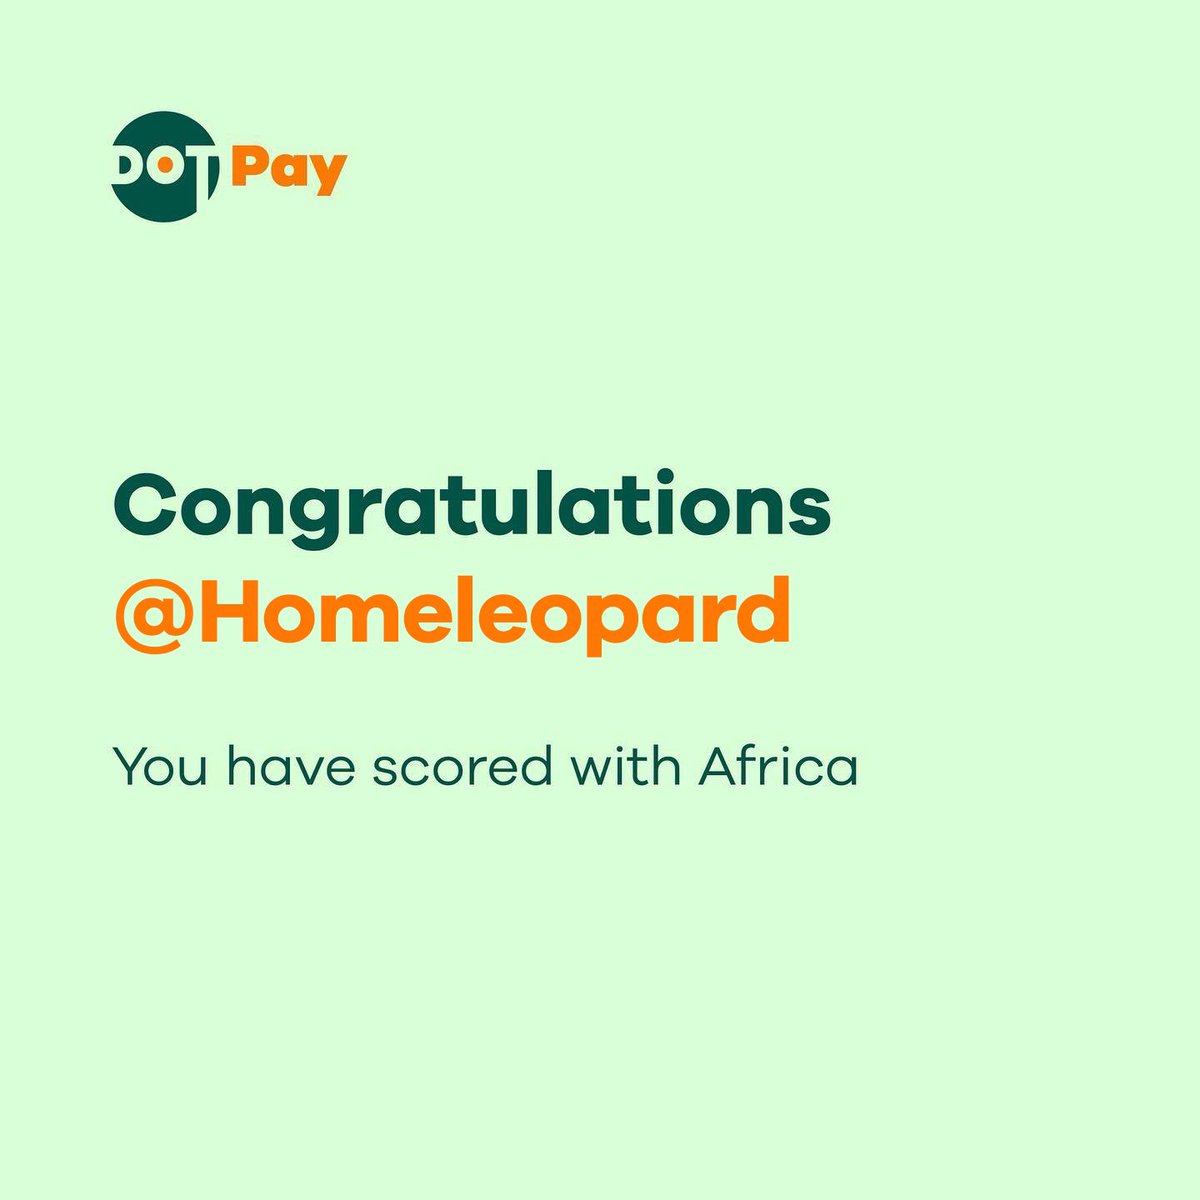 Congratulations @Homeleopard 🔥

You predicted the correct score line for Qatar Vs Senegal, retweeted the tweet and tagged two friends to follow @dotpayafrica

We have another #ScoreWithAfrica challenge coming up soon, Are you ready to win?